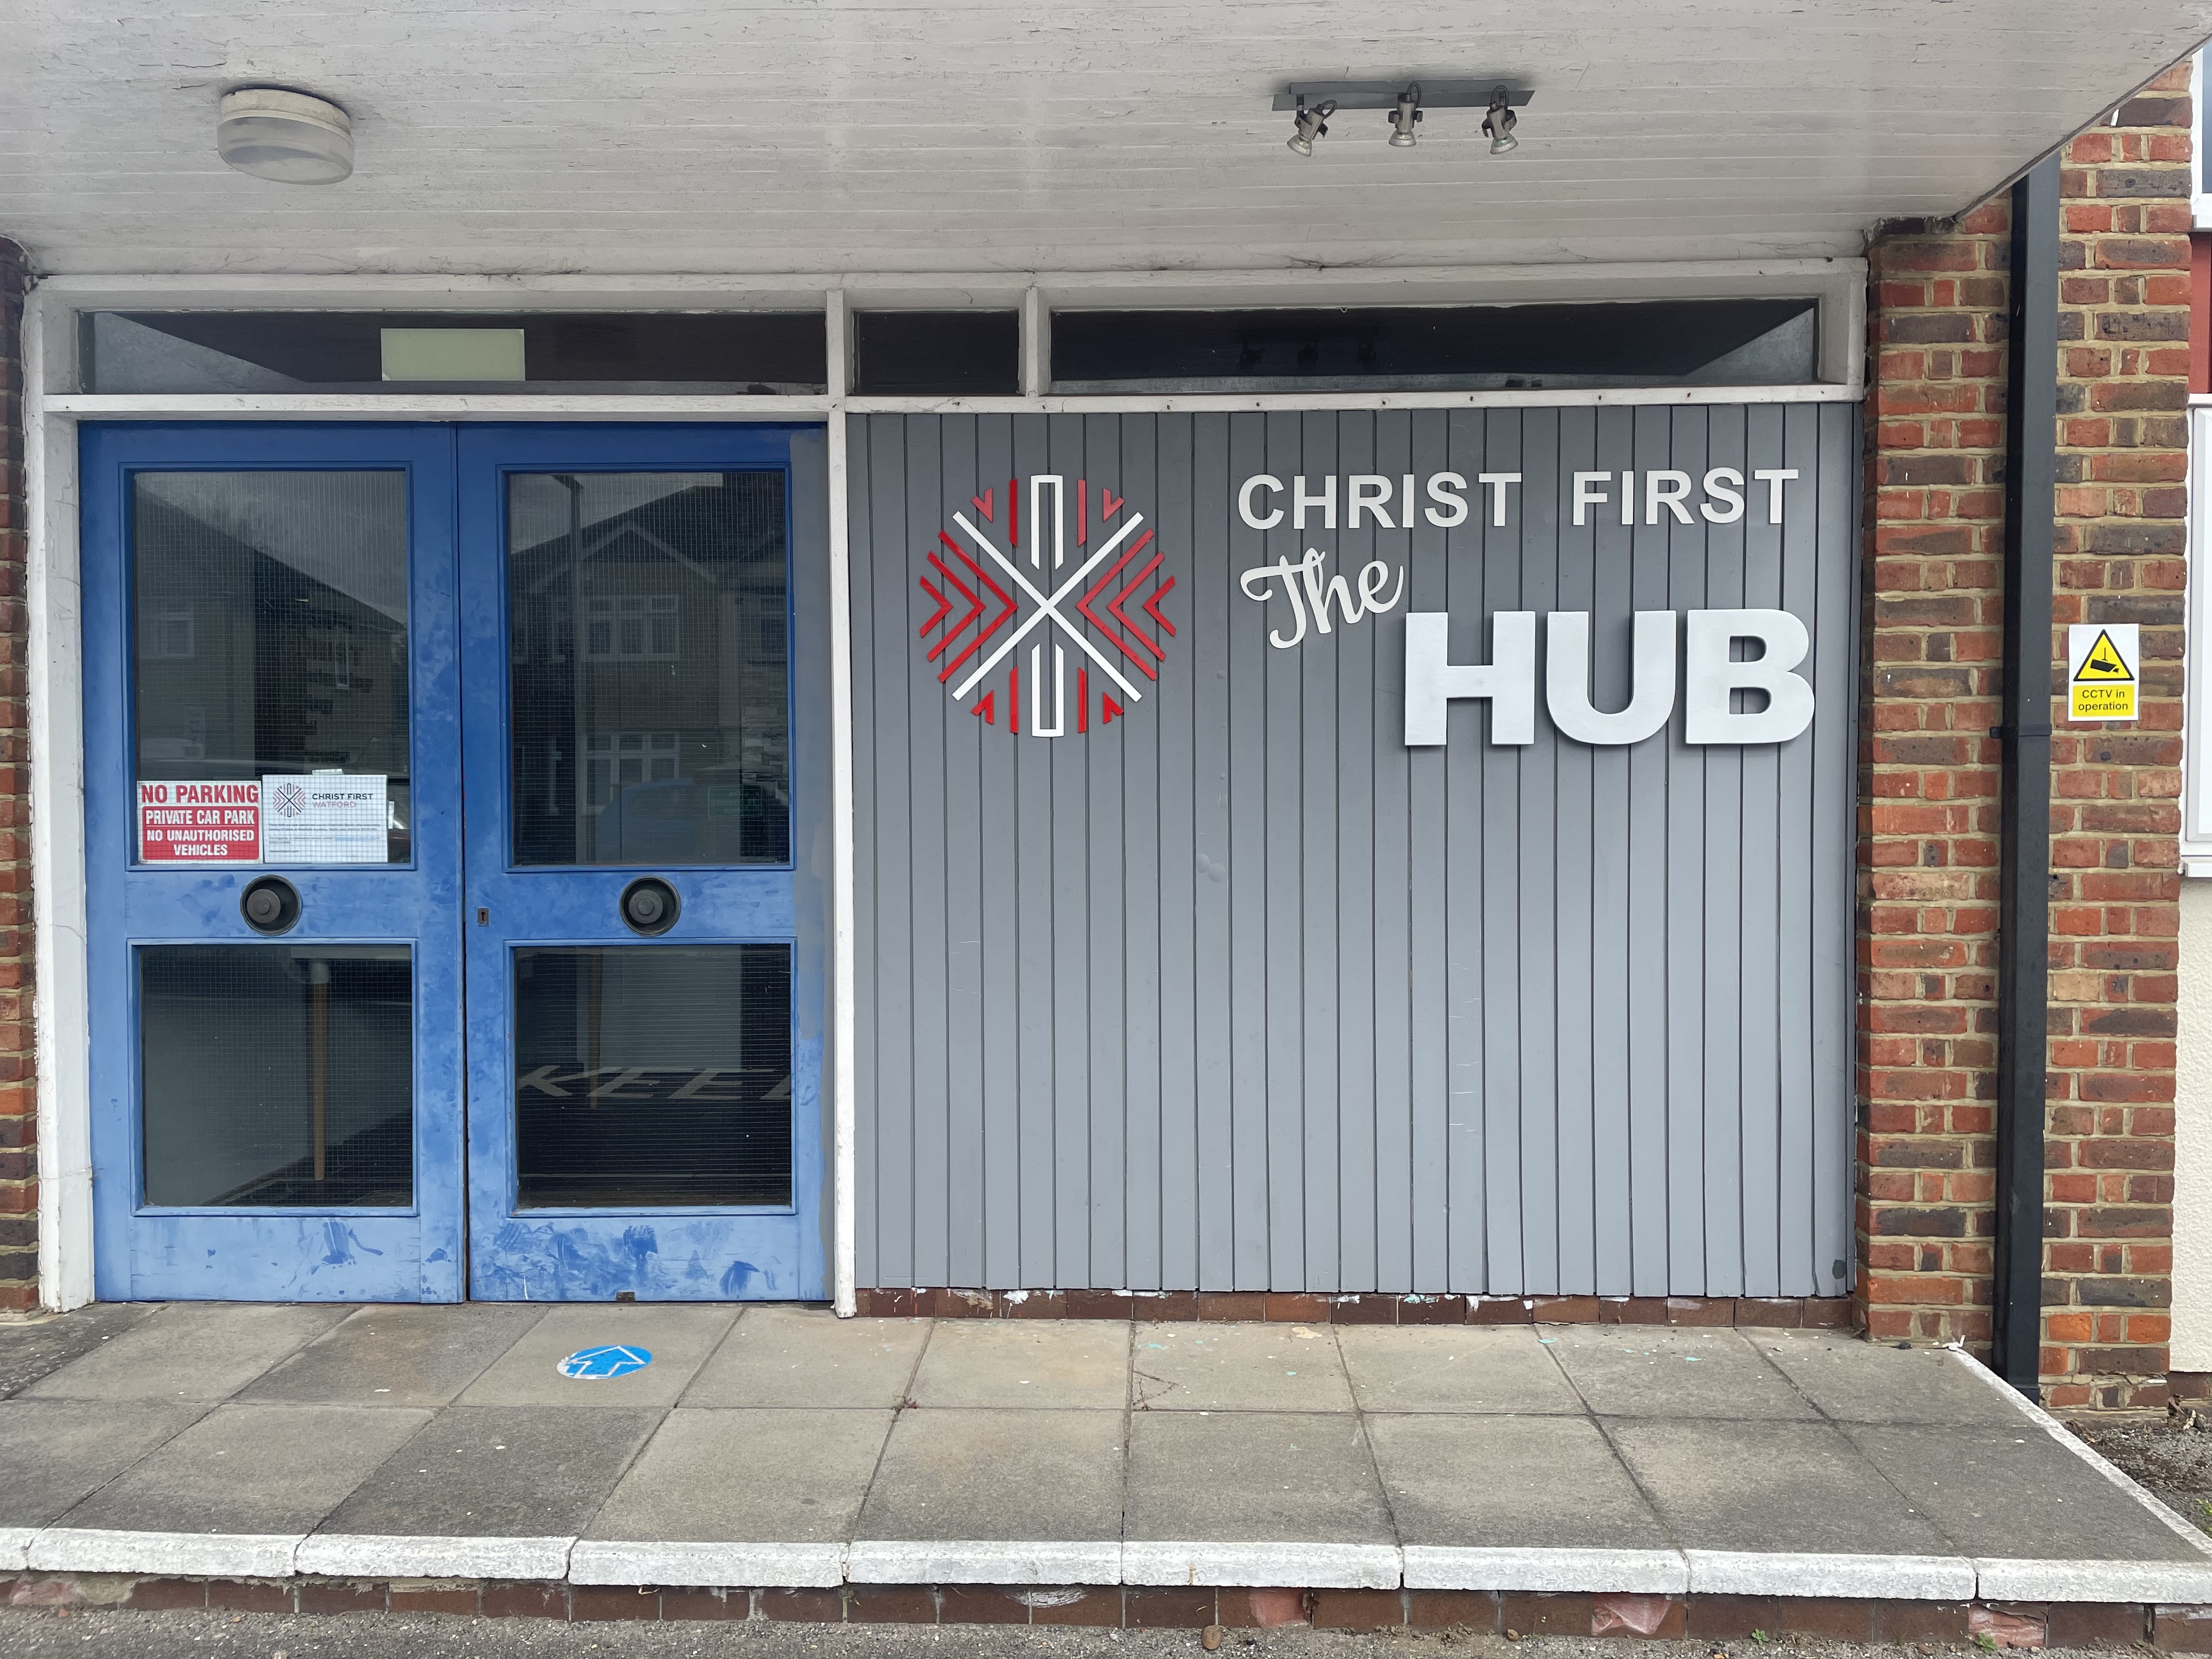 Christ First Hub where X1 Church sometimes carry out activities to help Afghan refugees feel like part of the community, The hub has blue doors and a grey sign which reads: 'Christ First The Hub'.